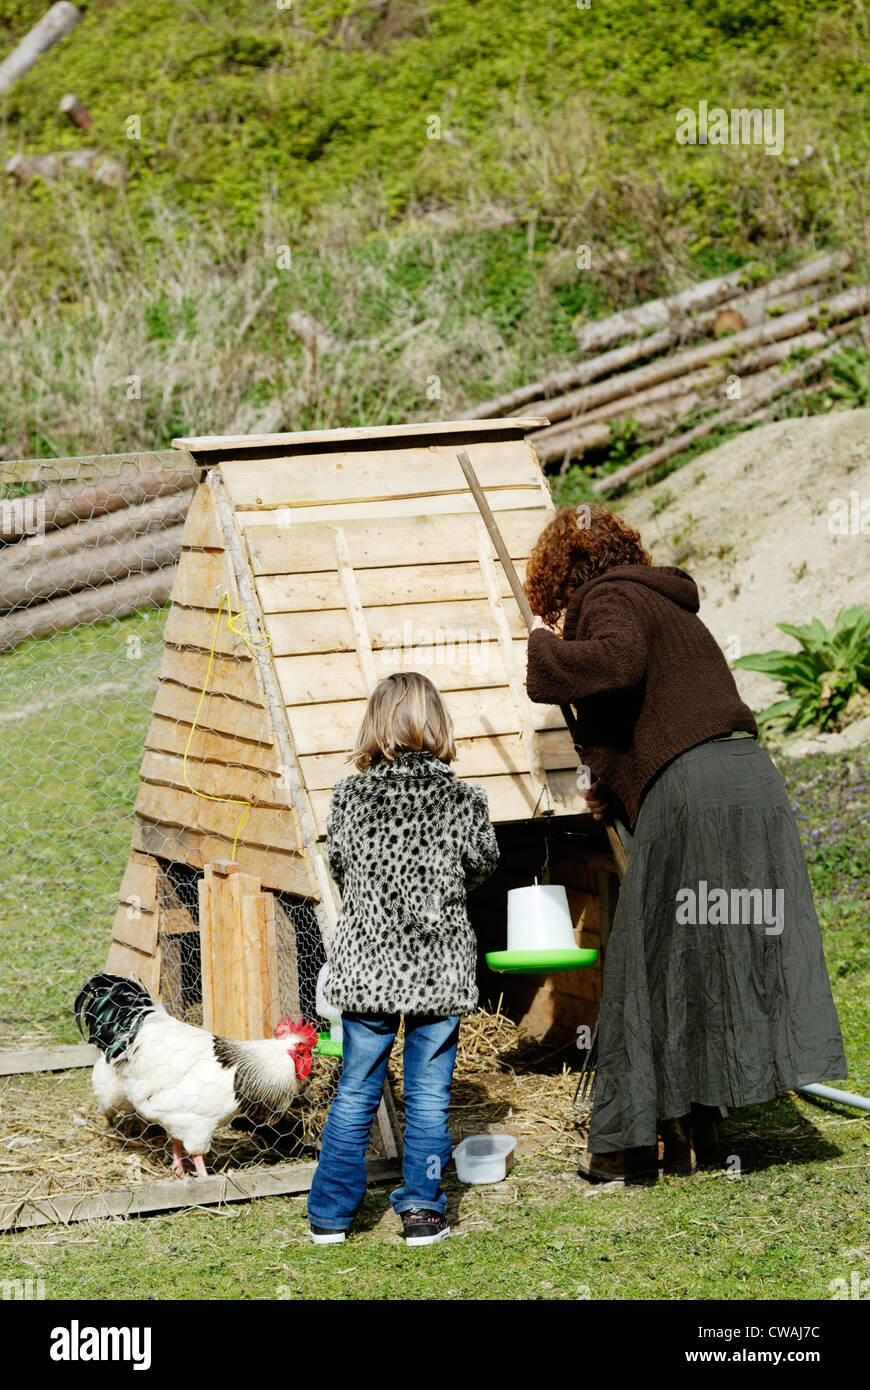 Young girl and grandmother tending to chickens, Wales, UK Stock Photo